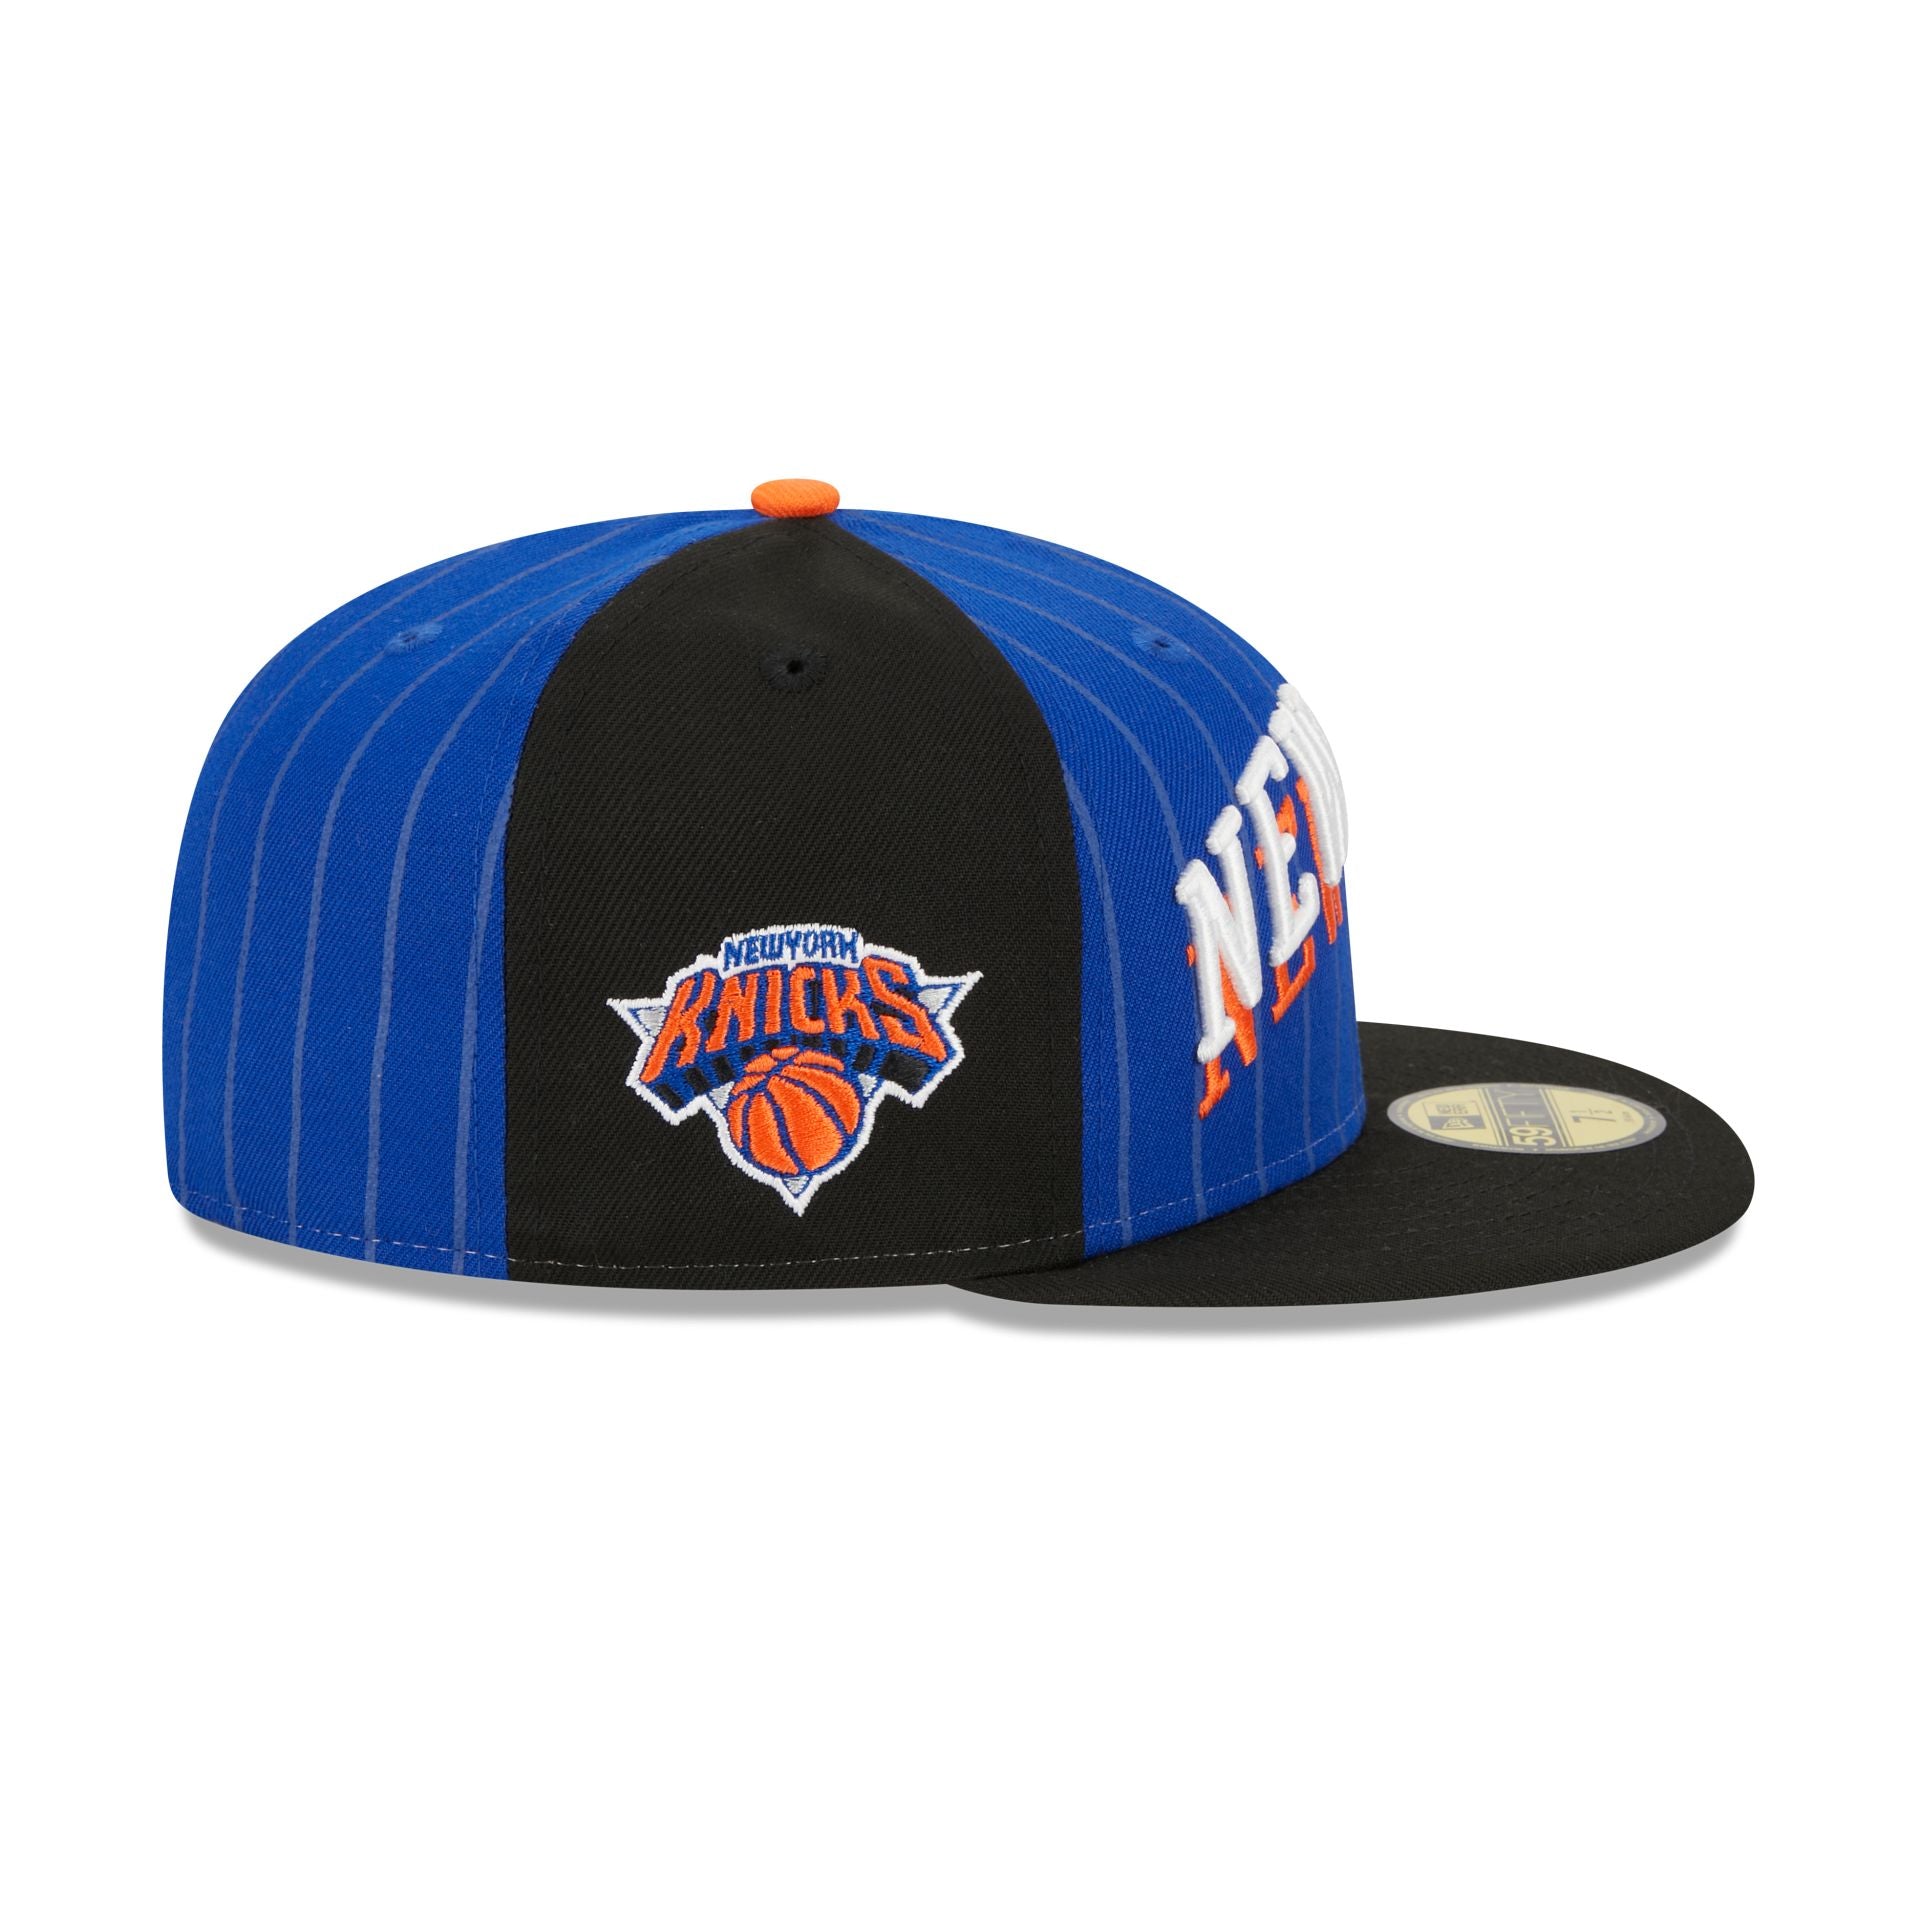 2 New York NY Knicks Mitchell & Ness NBA Authentic Fitted Hat Cap